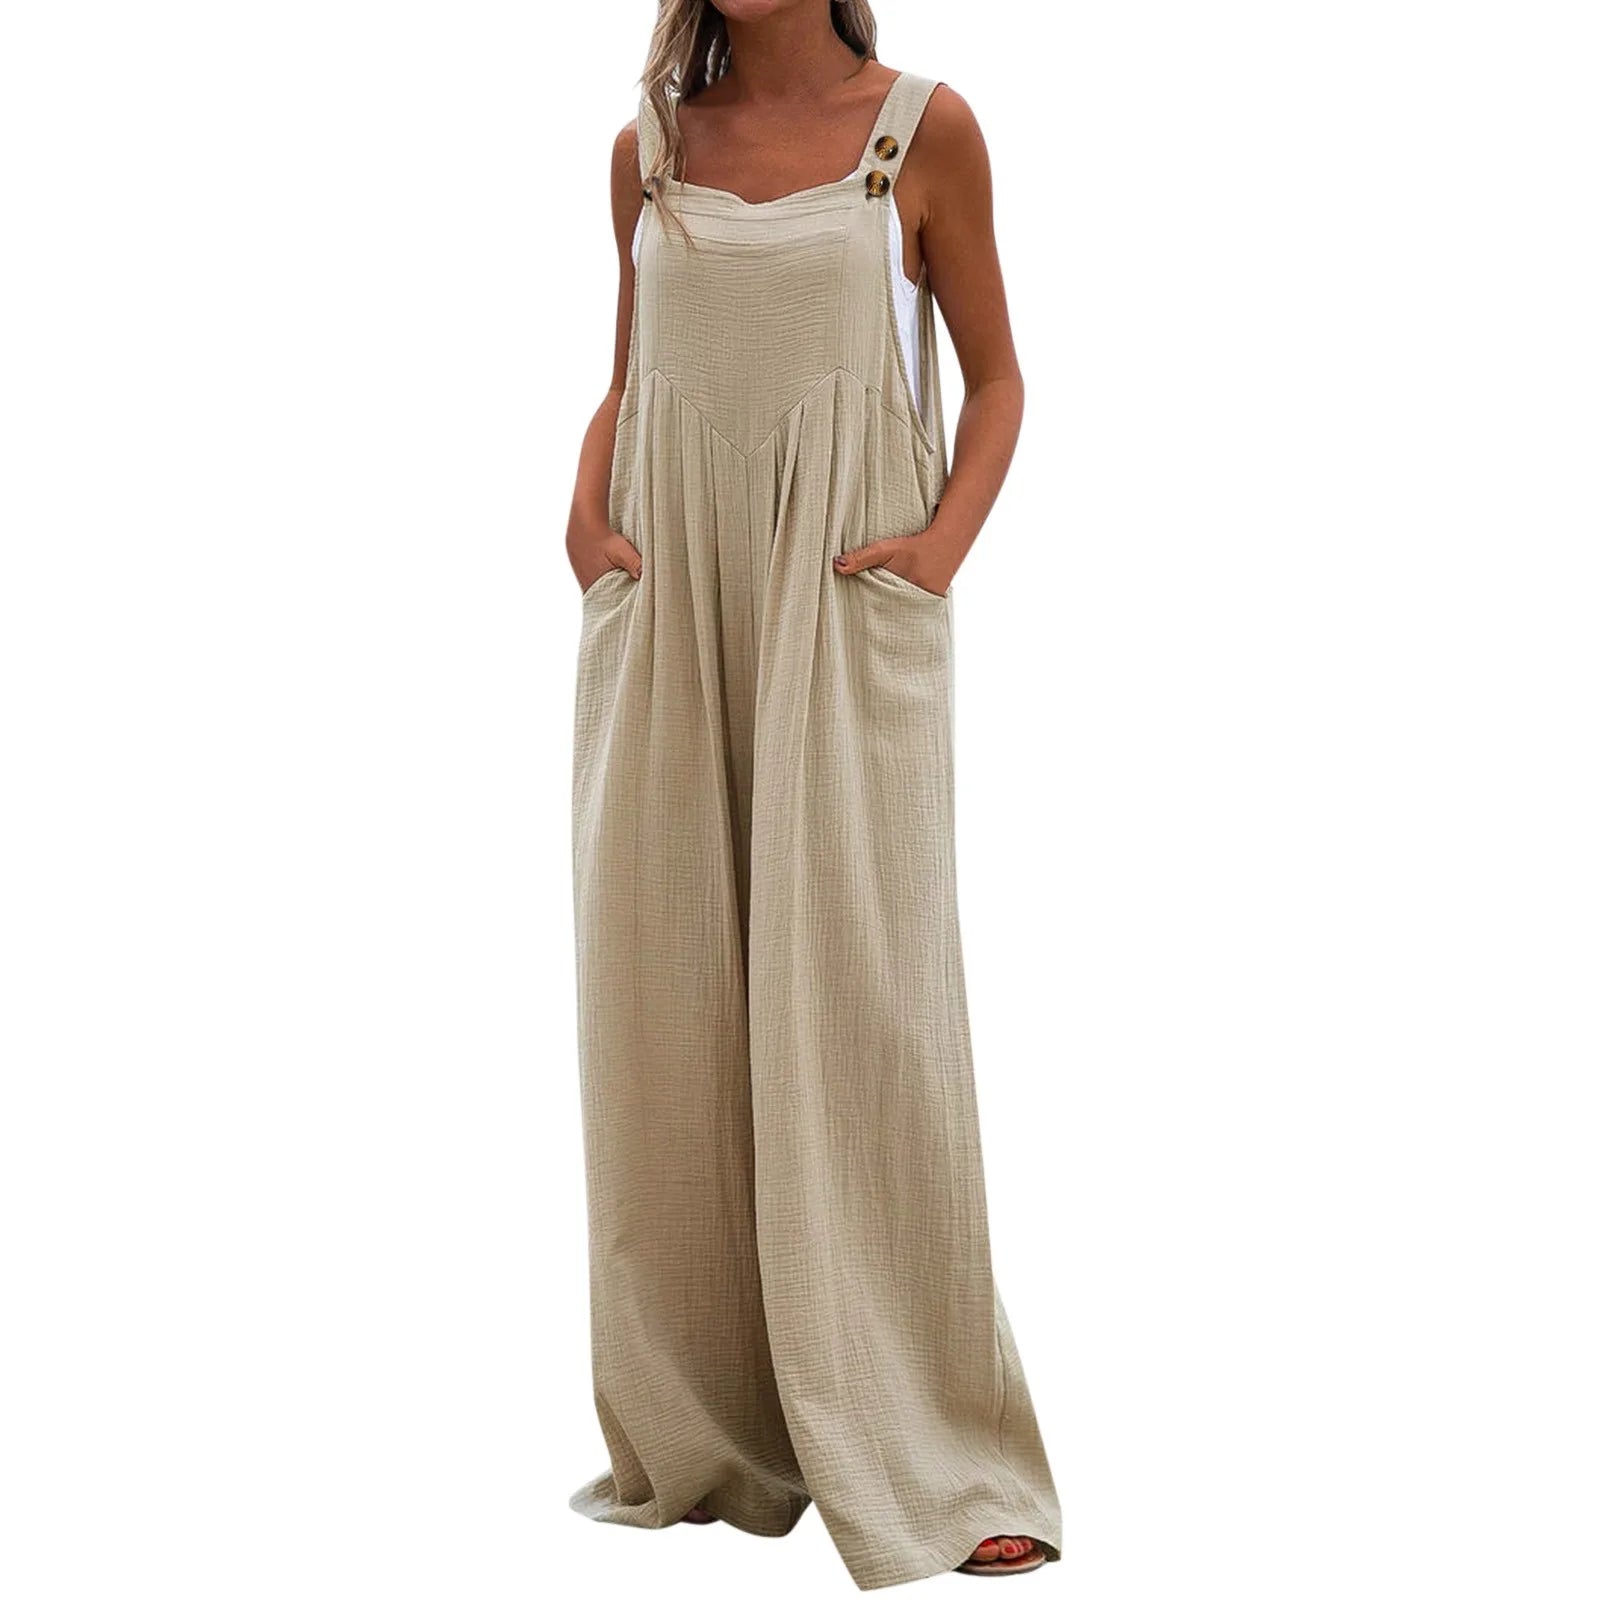 Chic Cotton Linen Women's Rompers: Casual Wide-Leg Jumpsuit for Holiday Beachwear